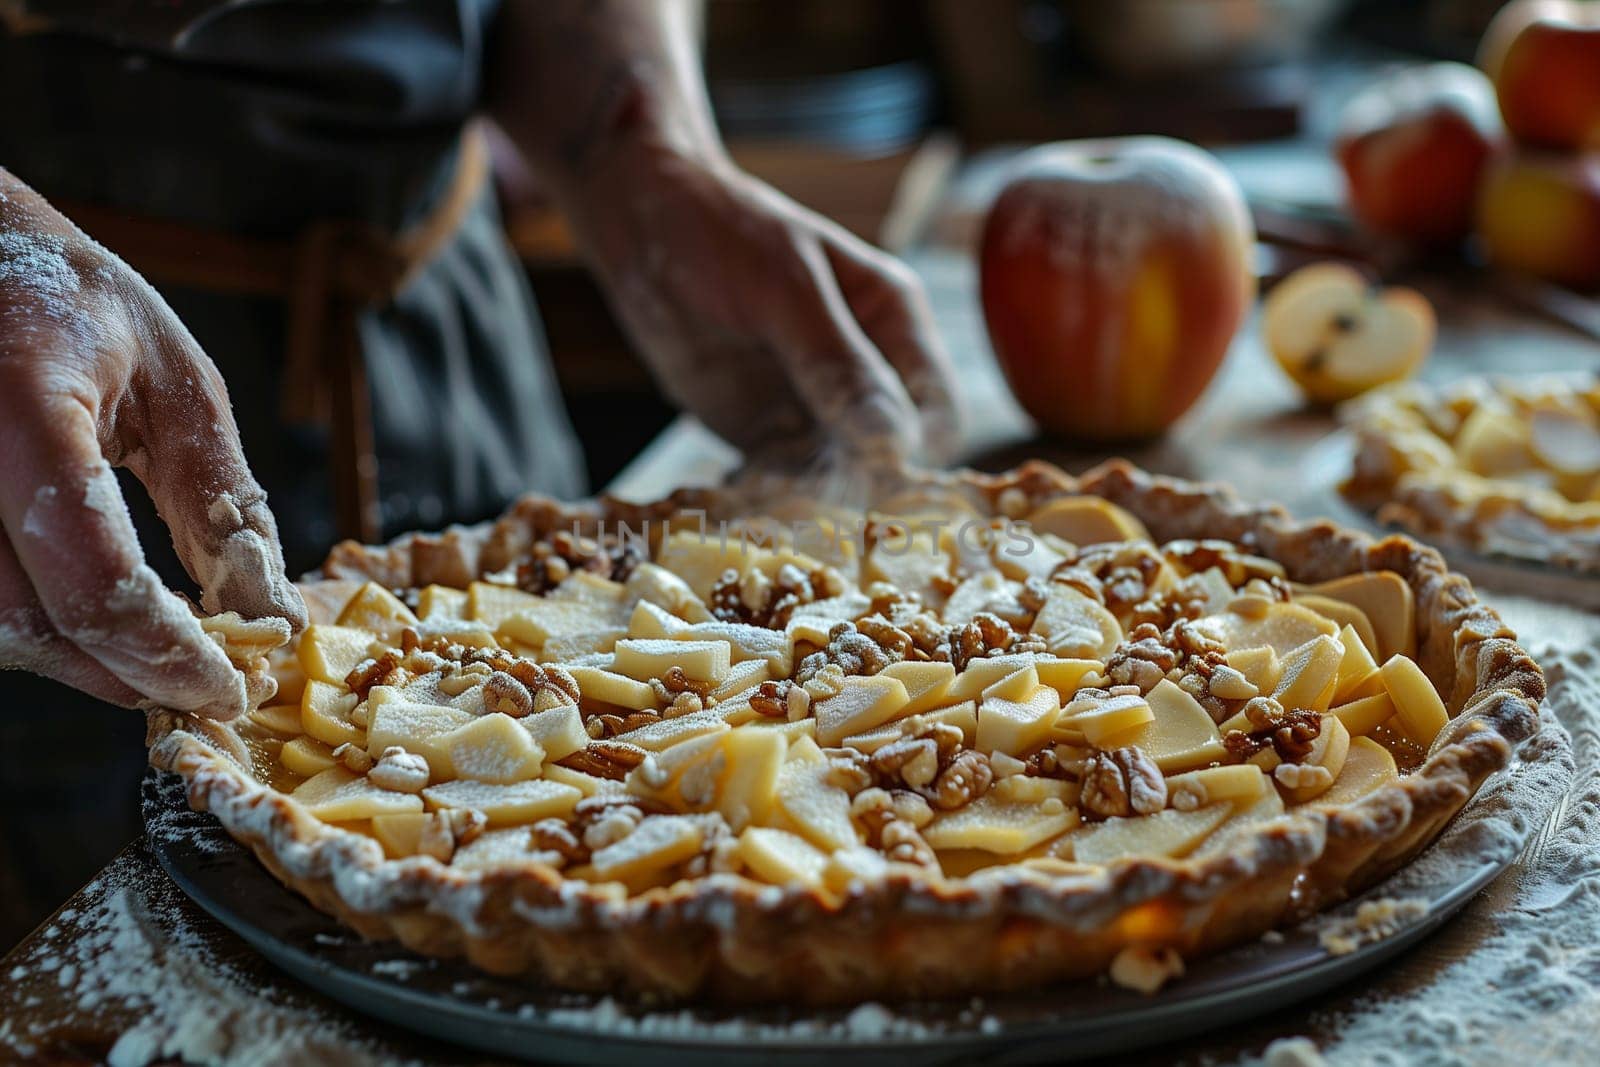 An individual adds various toppings to a pie, including fruits, nuts, and sauces, in a kitchen setting.